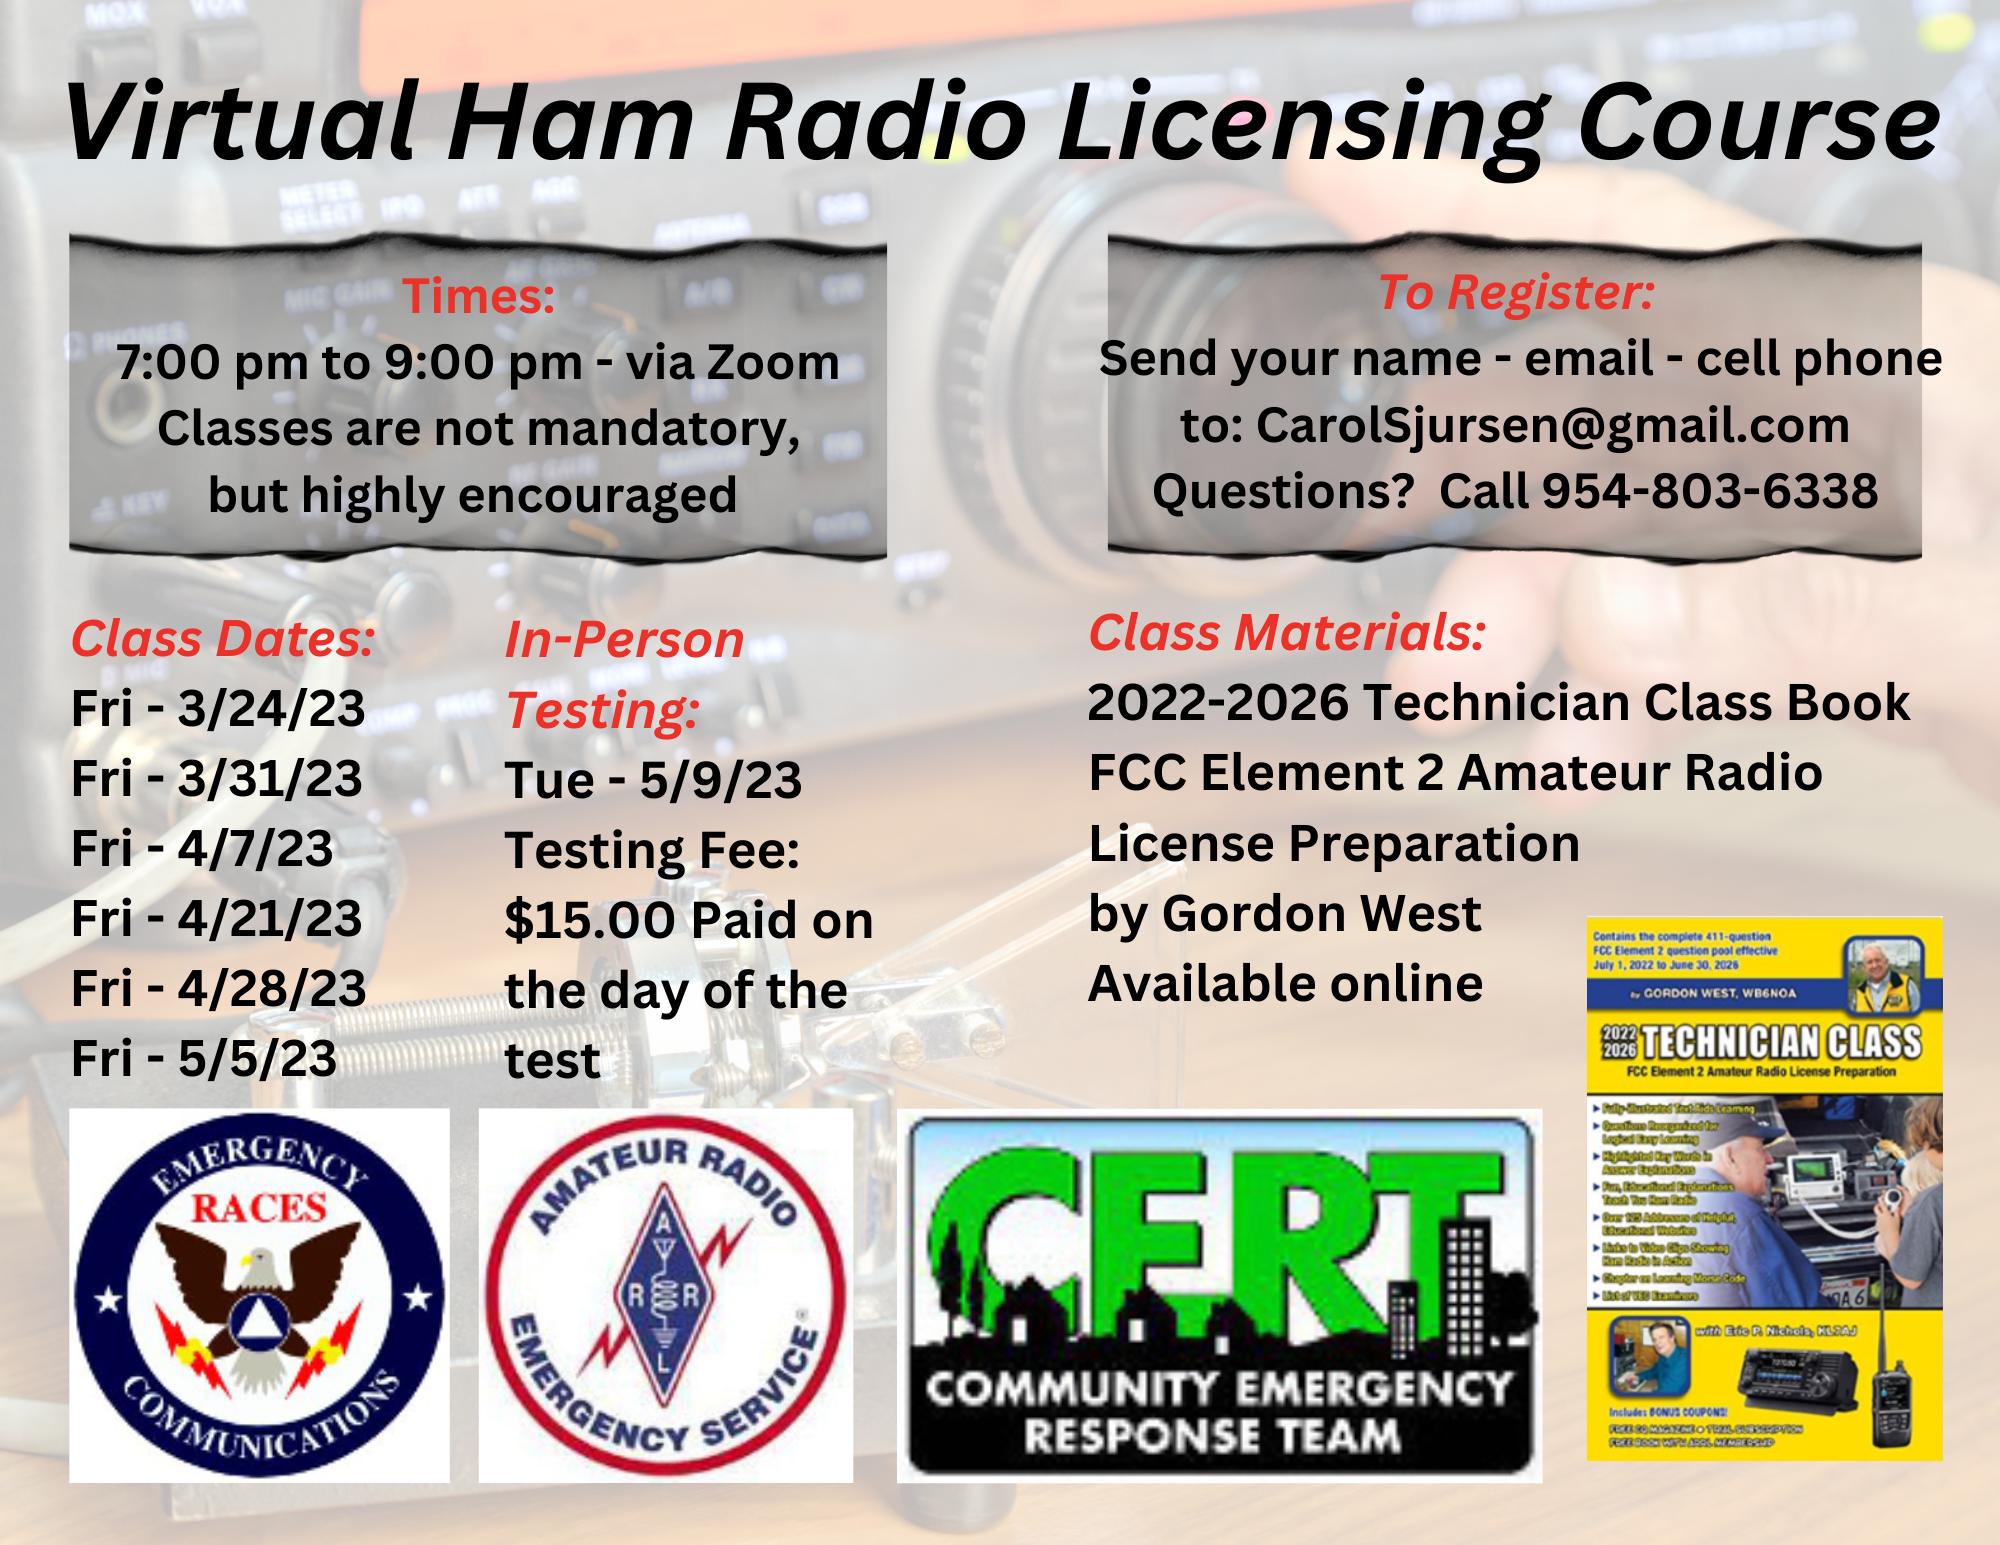 The Benefits of Getting a Ham Radio License